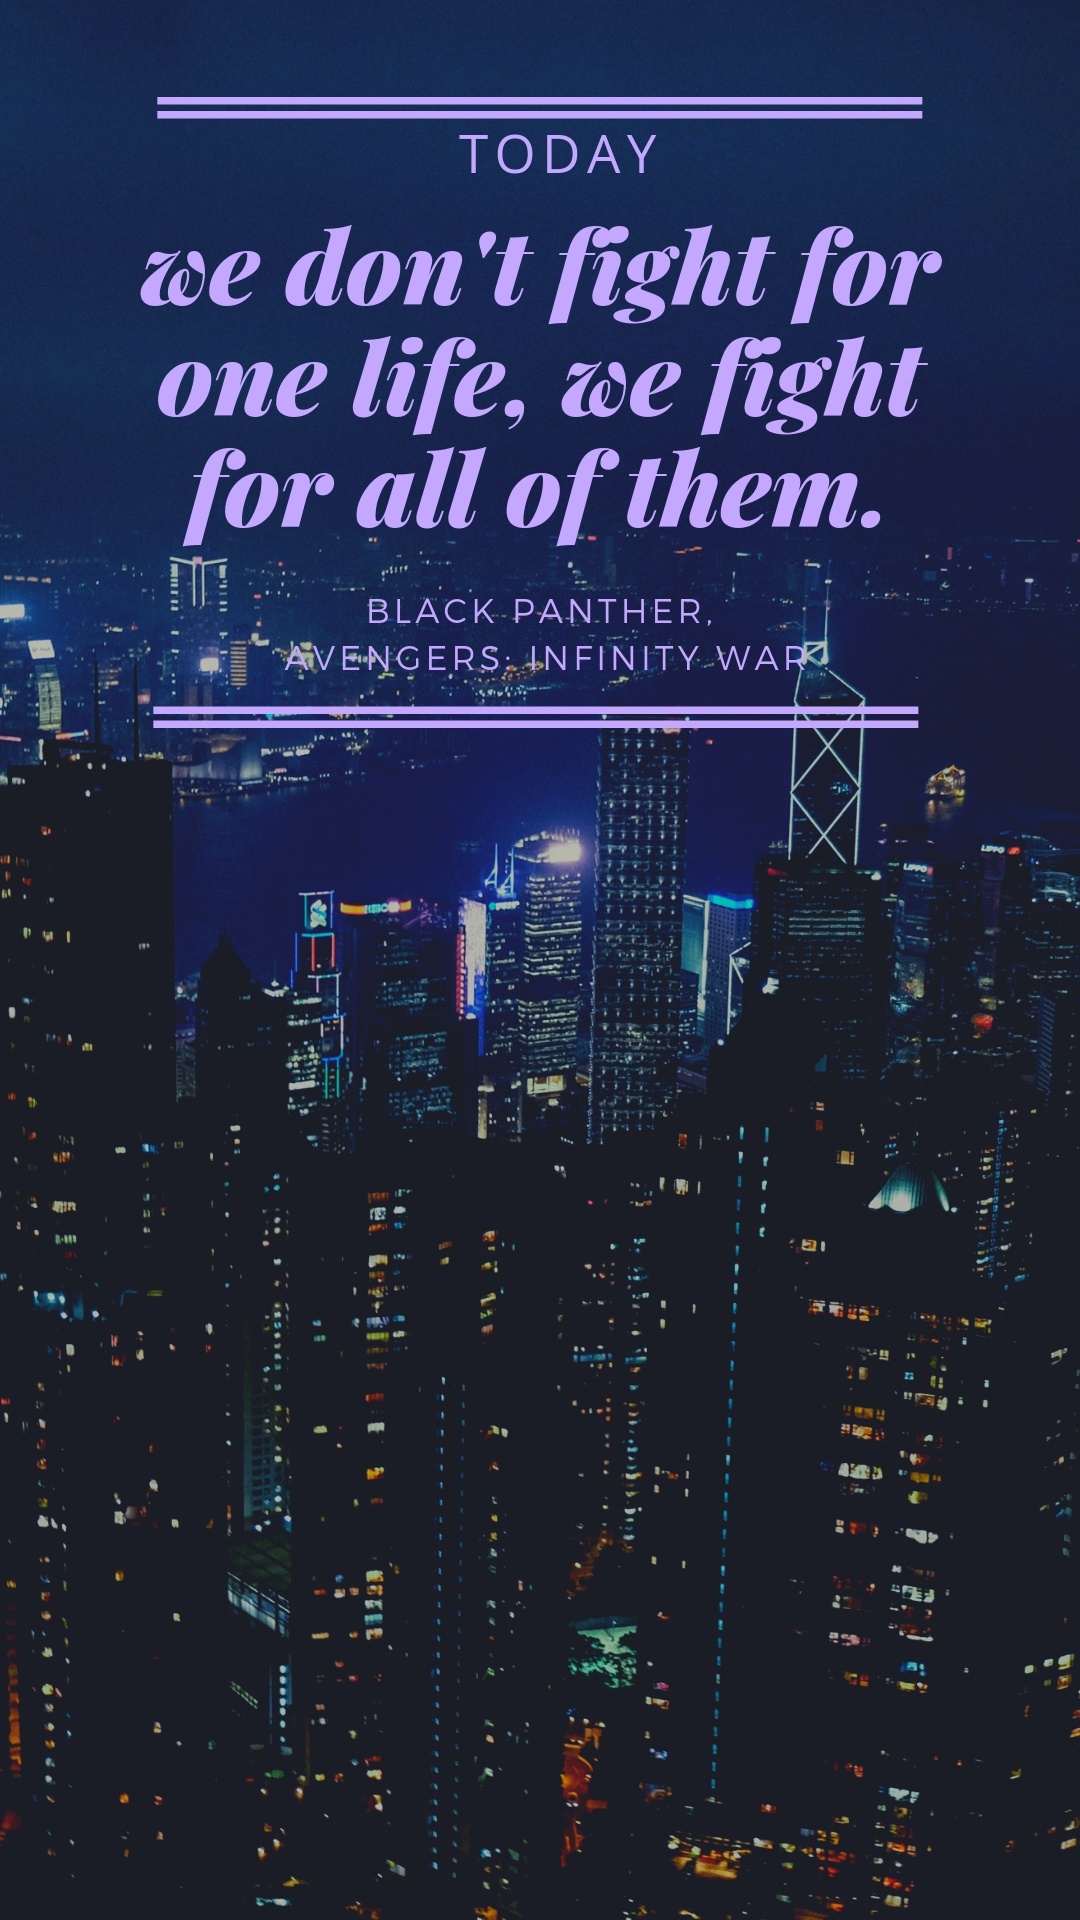 Inspirational Marvel Quotes, Black Panther, "Today we don't fight for one life, we fight for all of them." #BlackPanther #quotes #MarvelQuotes #AvengersInfinityWar